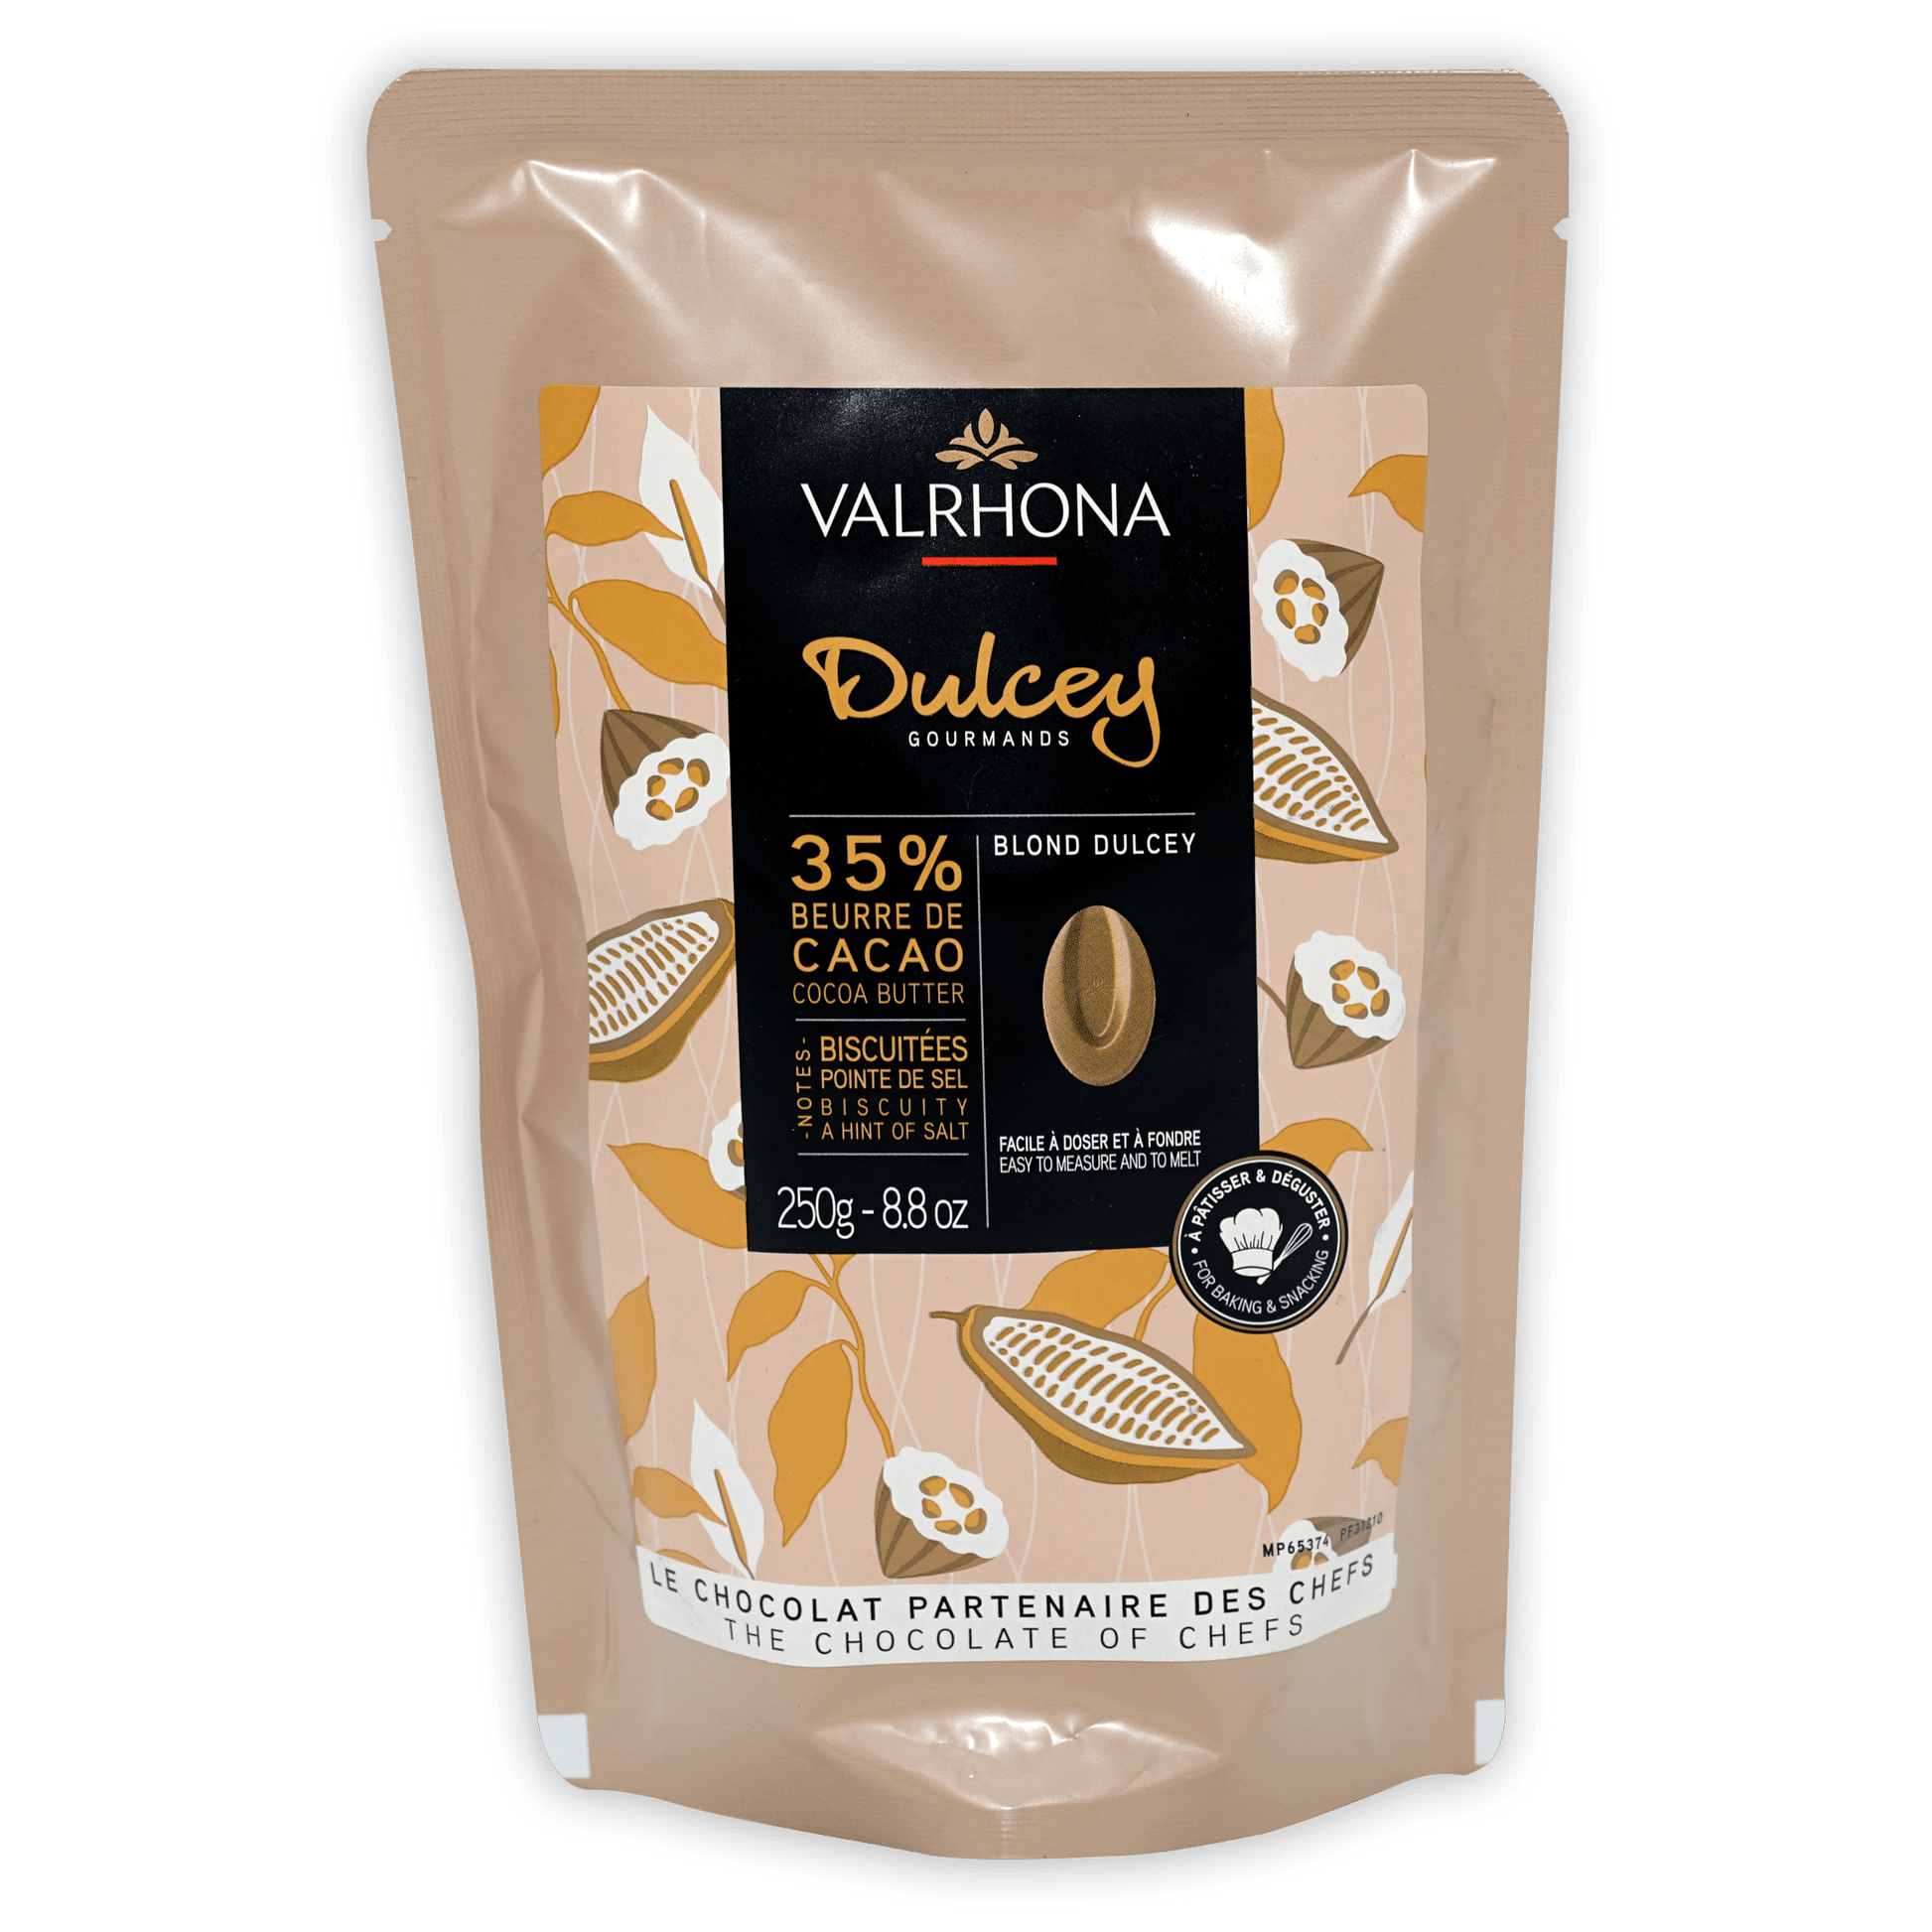 Valrhona Baking Feves Dulcey Blond Chocolate 35% – Bar & Cocoa